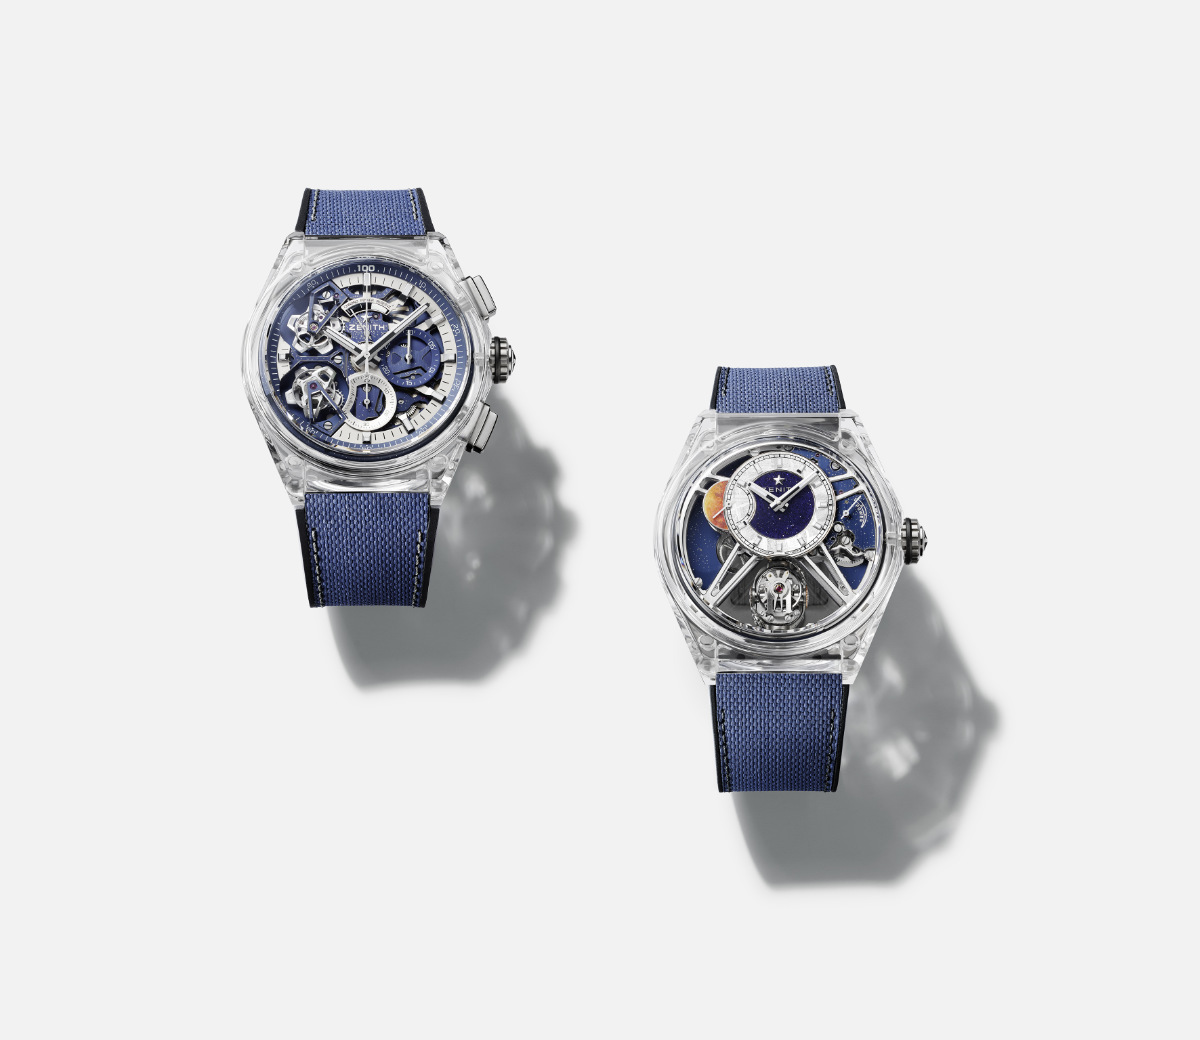 Three new Stars join the galaxy of Zenith watches for women